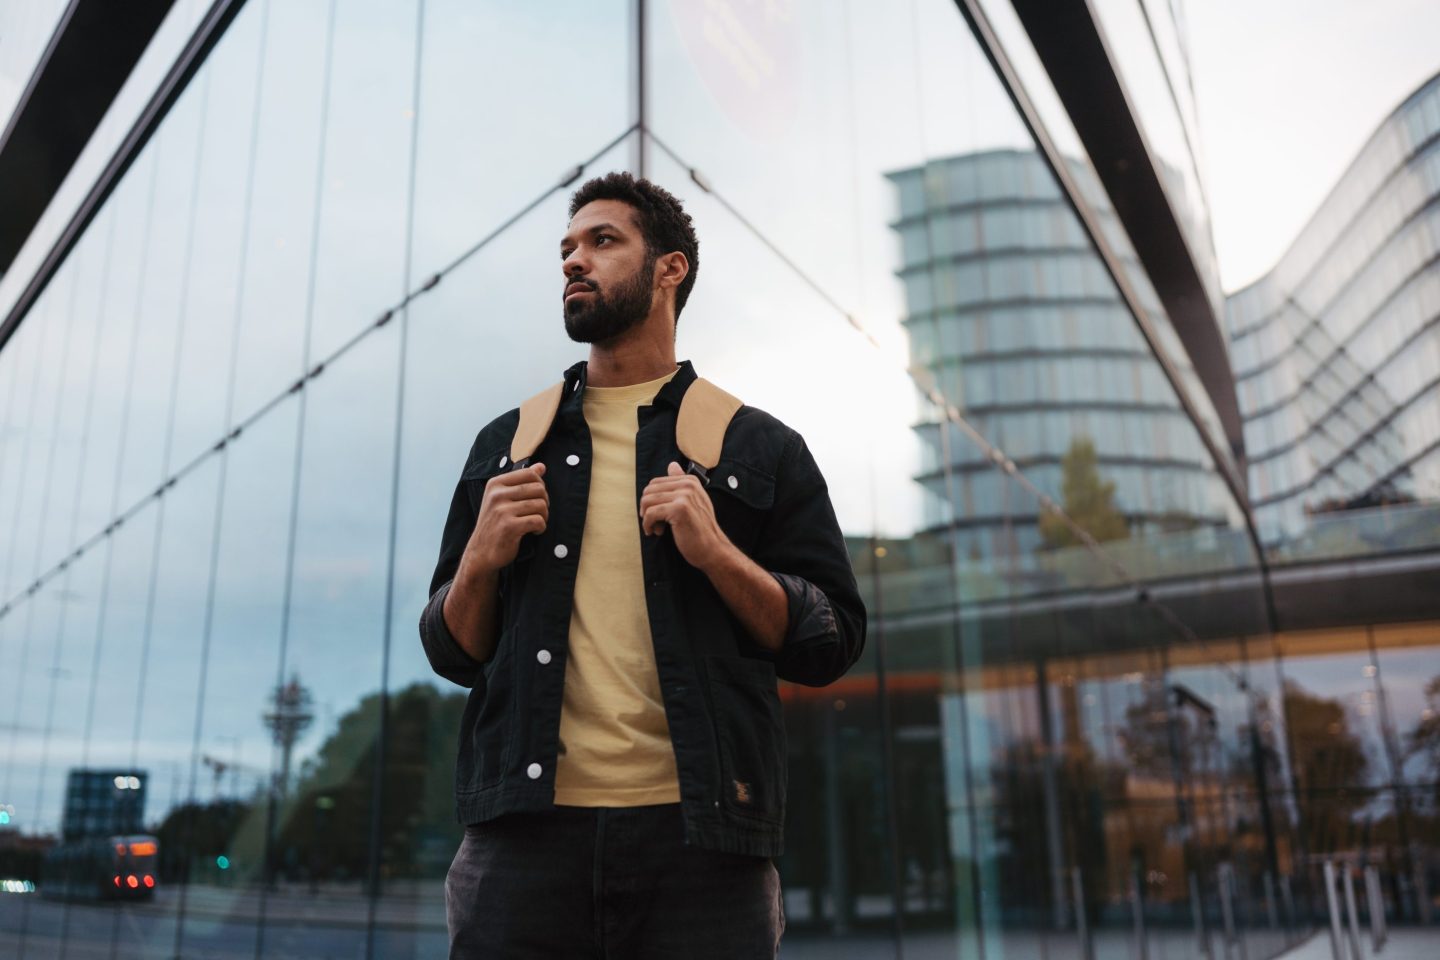 Portrait of young university student in the city standing in front of mirrored glass building. Single man starting his first job. New start, milestone or new beginning for young single man.